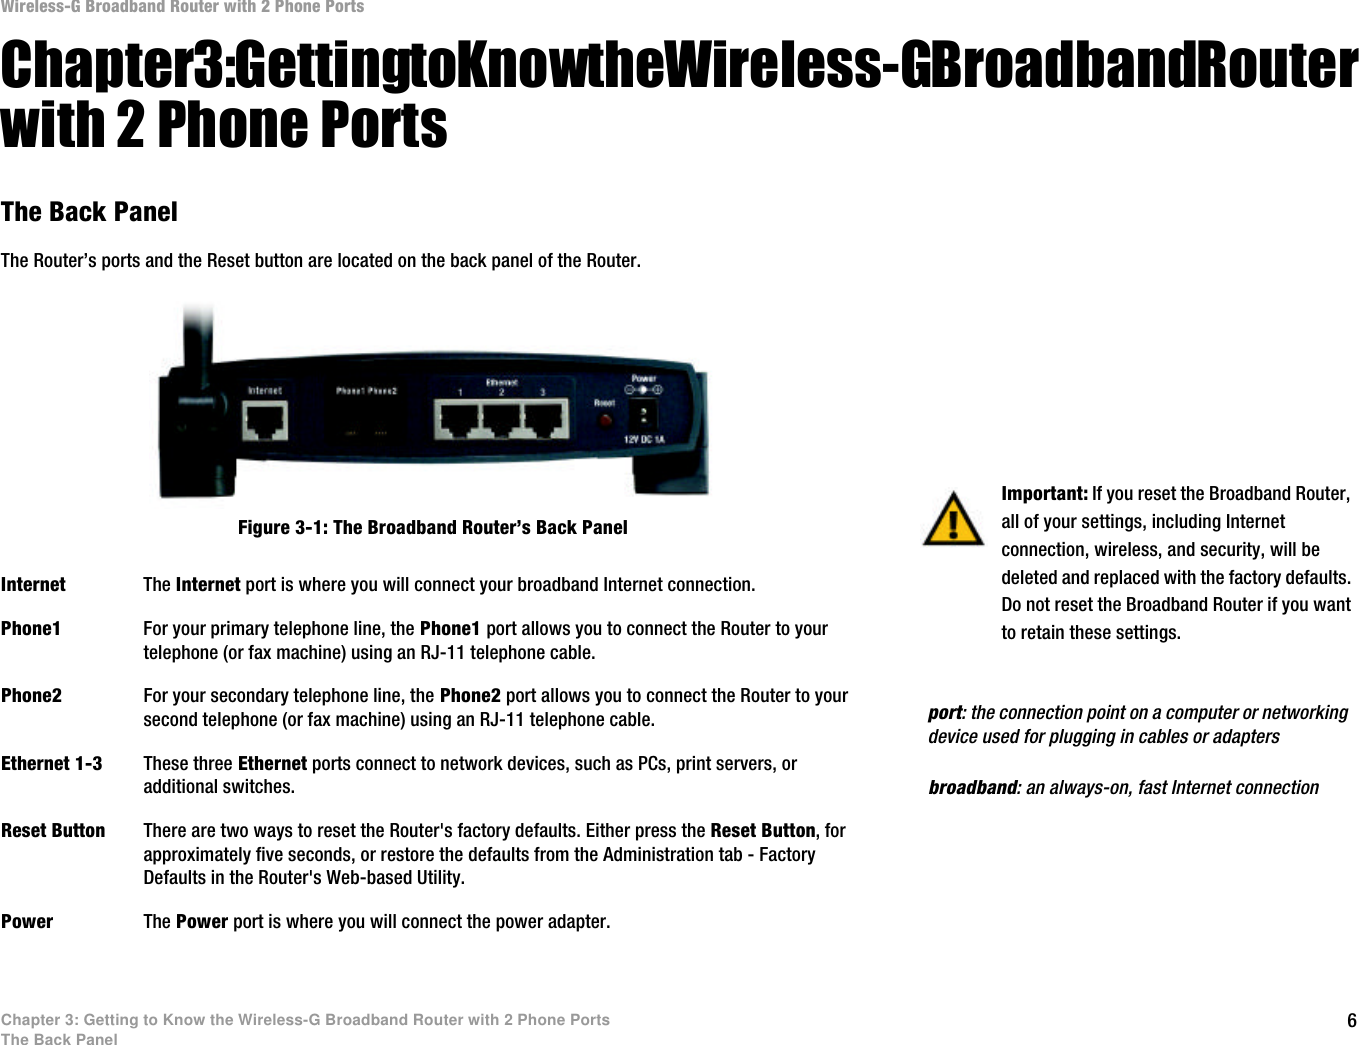 6Chapter 3: Getting to Know the Wireless-G Broadband Router with 2 Phone PortsThe Back PanelWireless-G Broadband Router with 2 Phone PortsChapter 3: Getting to Know the Wireless-G Broadband Router with 2 Phone PortsThe Back PanelThe Router’s ports and the Reset button are located on the back panel of the Router.Internet The Internet port is where you will connect your broadband Internet connection.Phone1 For your primary telephone line, the Phone1 port allows you to connect the Router to your telephone (or fax machine) using an RJ-11 telephone cable.Phone2 For your secondary telephone line, the Phone2 port allows you to connect the Router to your second telephone (or fax machine) using an RJ-11 telephone cable.Ethernet 1-3 These three Ethernet ports connect to network devices, such as PCs, print servers, or additional switches.Reset Button There are two ways to reset the Router&apos;s factory defaults. Either press the Reset Button, for approximately five seconds, or restore the defaults from the Administration tab - Factory Defaults in the Router&apos;s Web-based Utility.Power The Power port is where you will connect the power adapter.Important: If you reset the Broadband Router, all of your settings, including Internet connection, wireless, and security, will be deleted and replaced with the factory defaults. Do not reset the Broadband Router if you want to retain these settings.Figure 3-1: The Broadband Router’s Back Panelbroadband: an always-on, fast Internet connectionport: the connection point on a computer or networking device used for plugging in cables or adapters